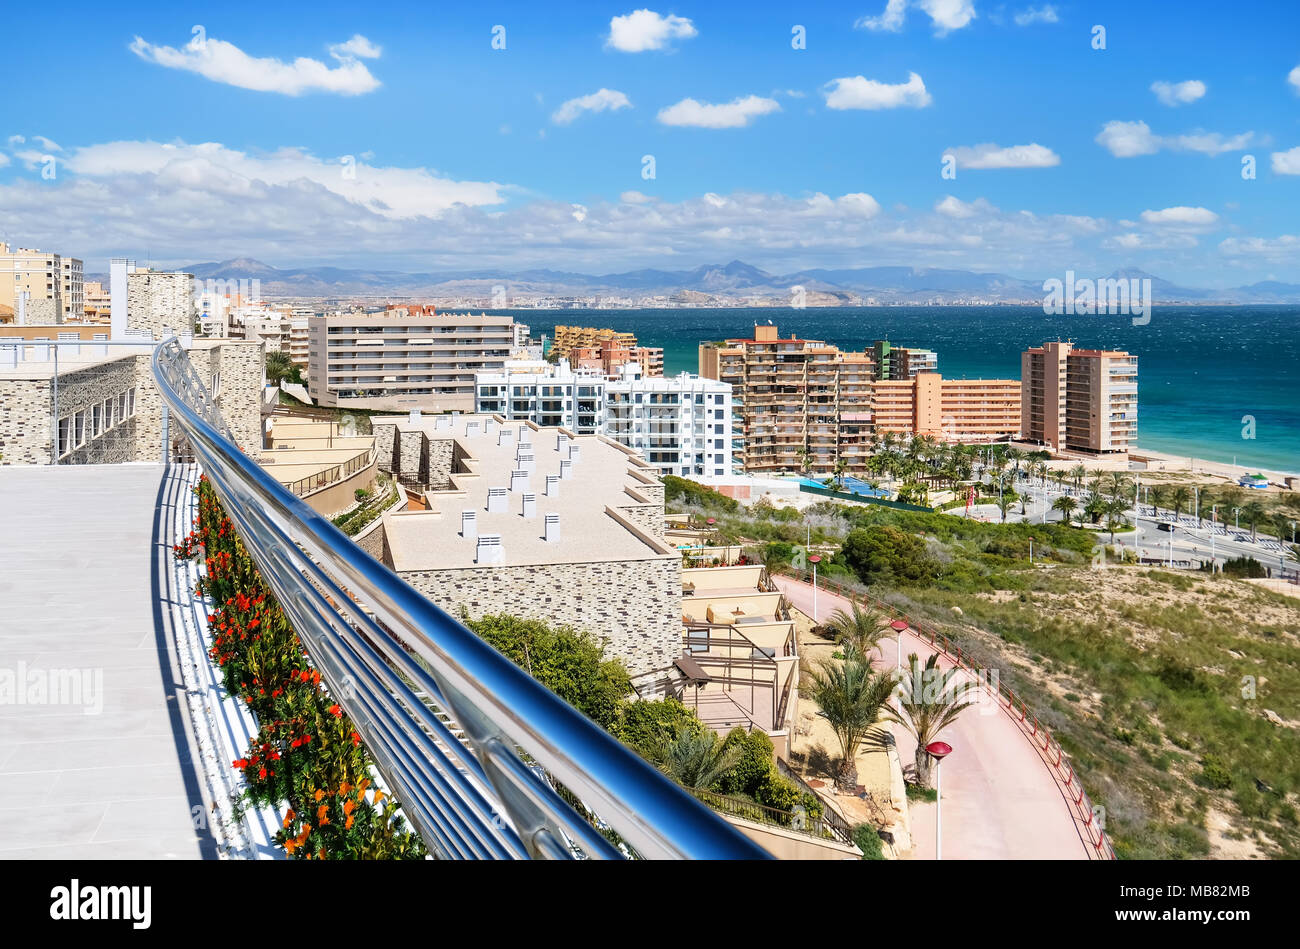 View from the hotel's balcony to the coastline of Alicante. Costa Blanca. Spain Stock Photo